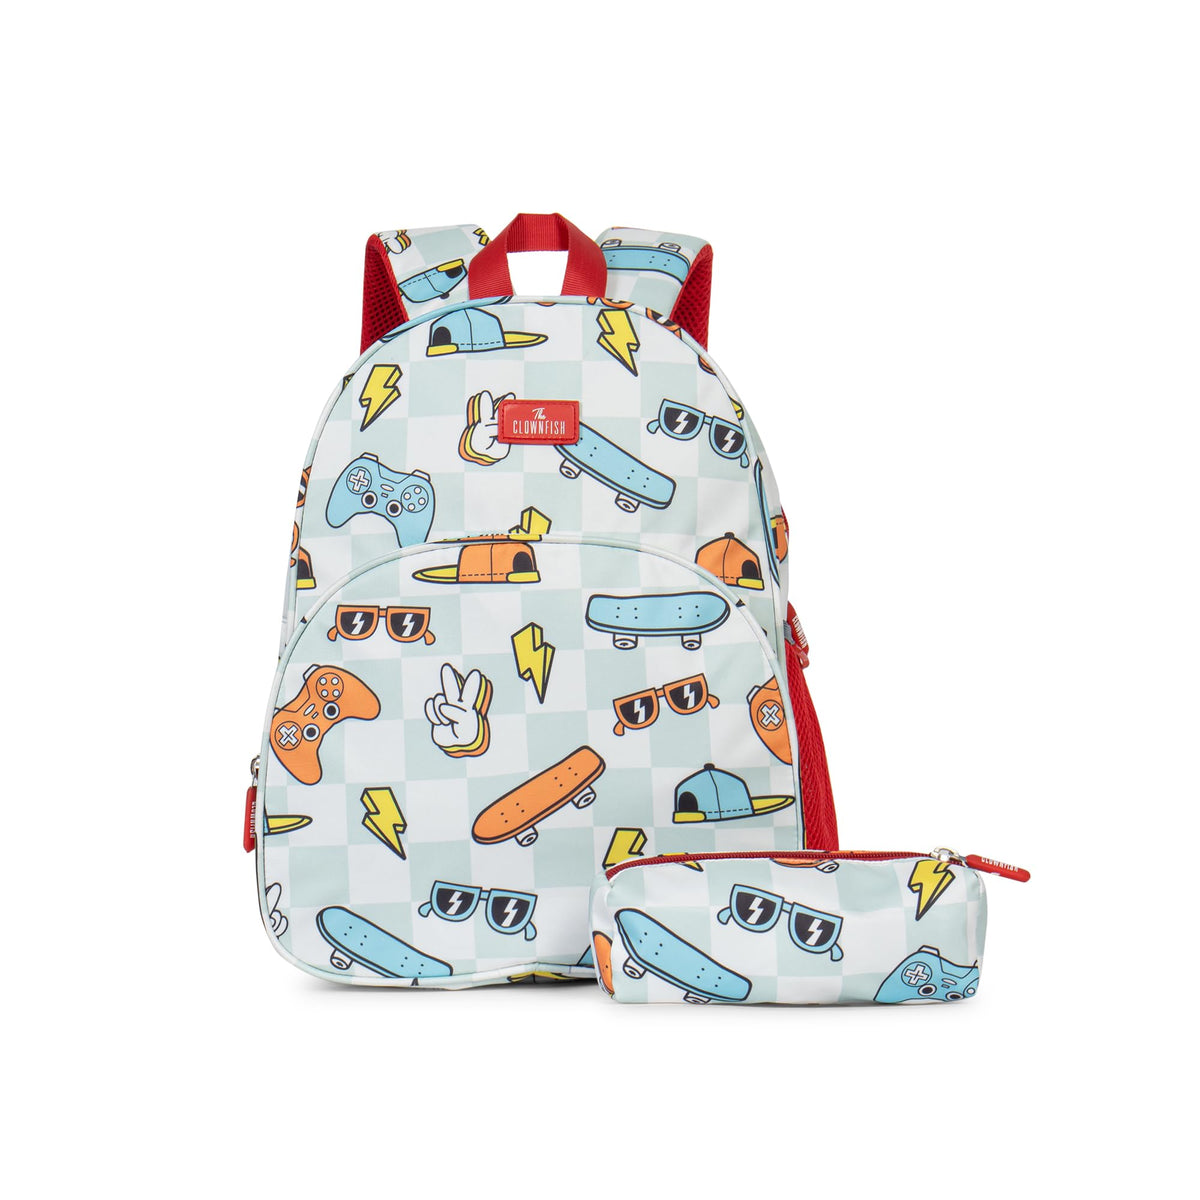 THE CLOWNFISH Cosmic Critters Series Printed Polyester 15 Litres Kids Backpack School Bag with Free Pencil Staionery Pouch Daypack Picnic Bag for Tiny Tots Of Age 5-7 Years (Grey - Cheque)